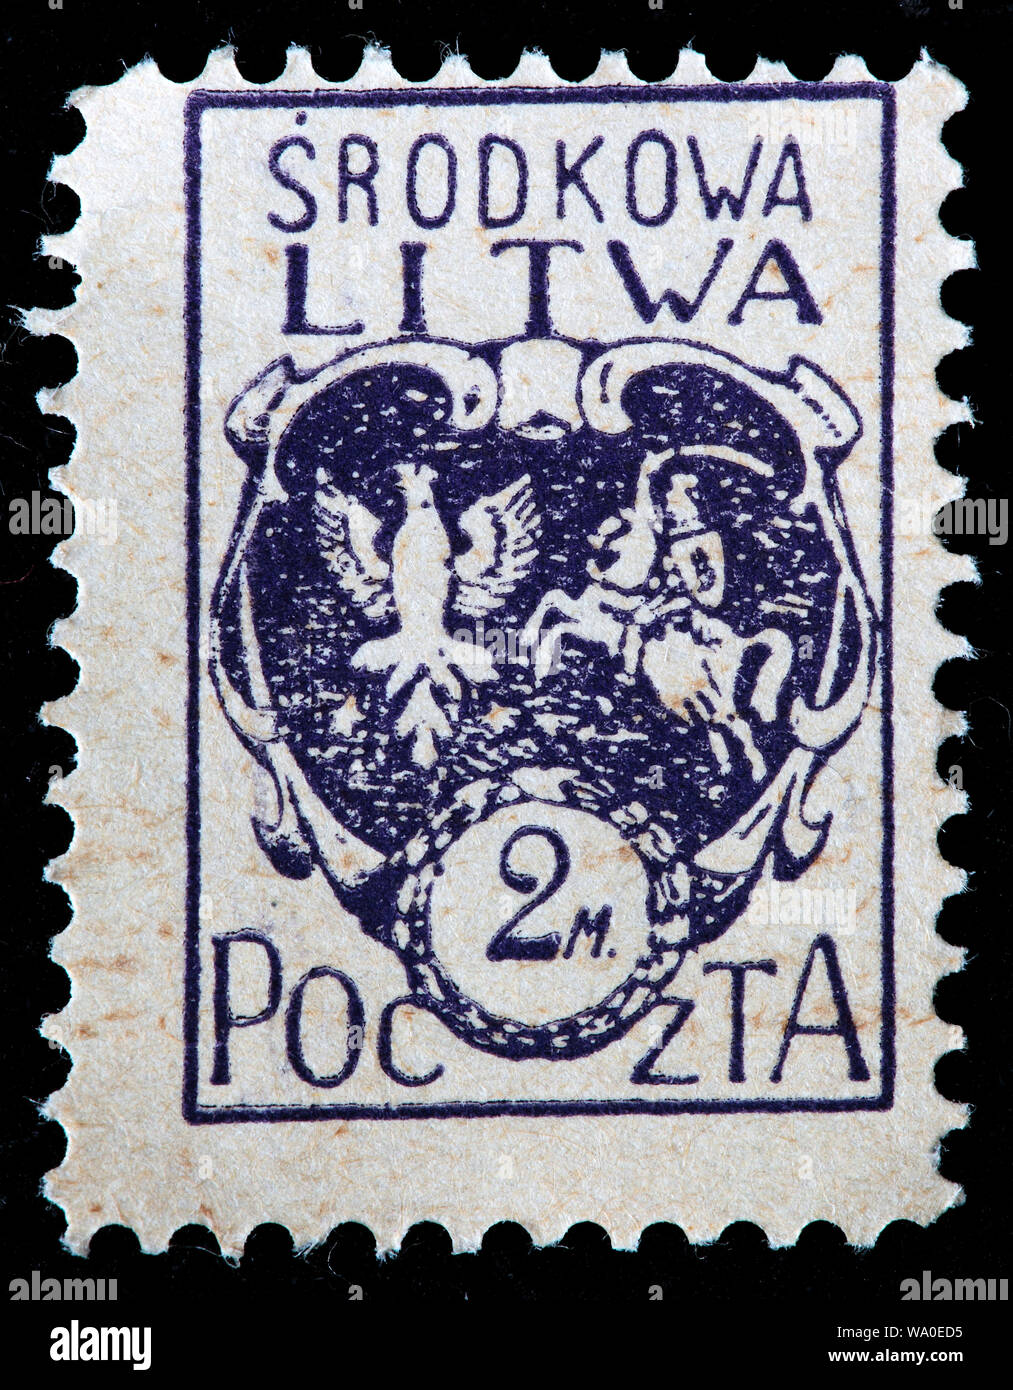 Coat of arms, postage stamp, Central Lithuania, 1920 Stock Photo